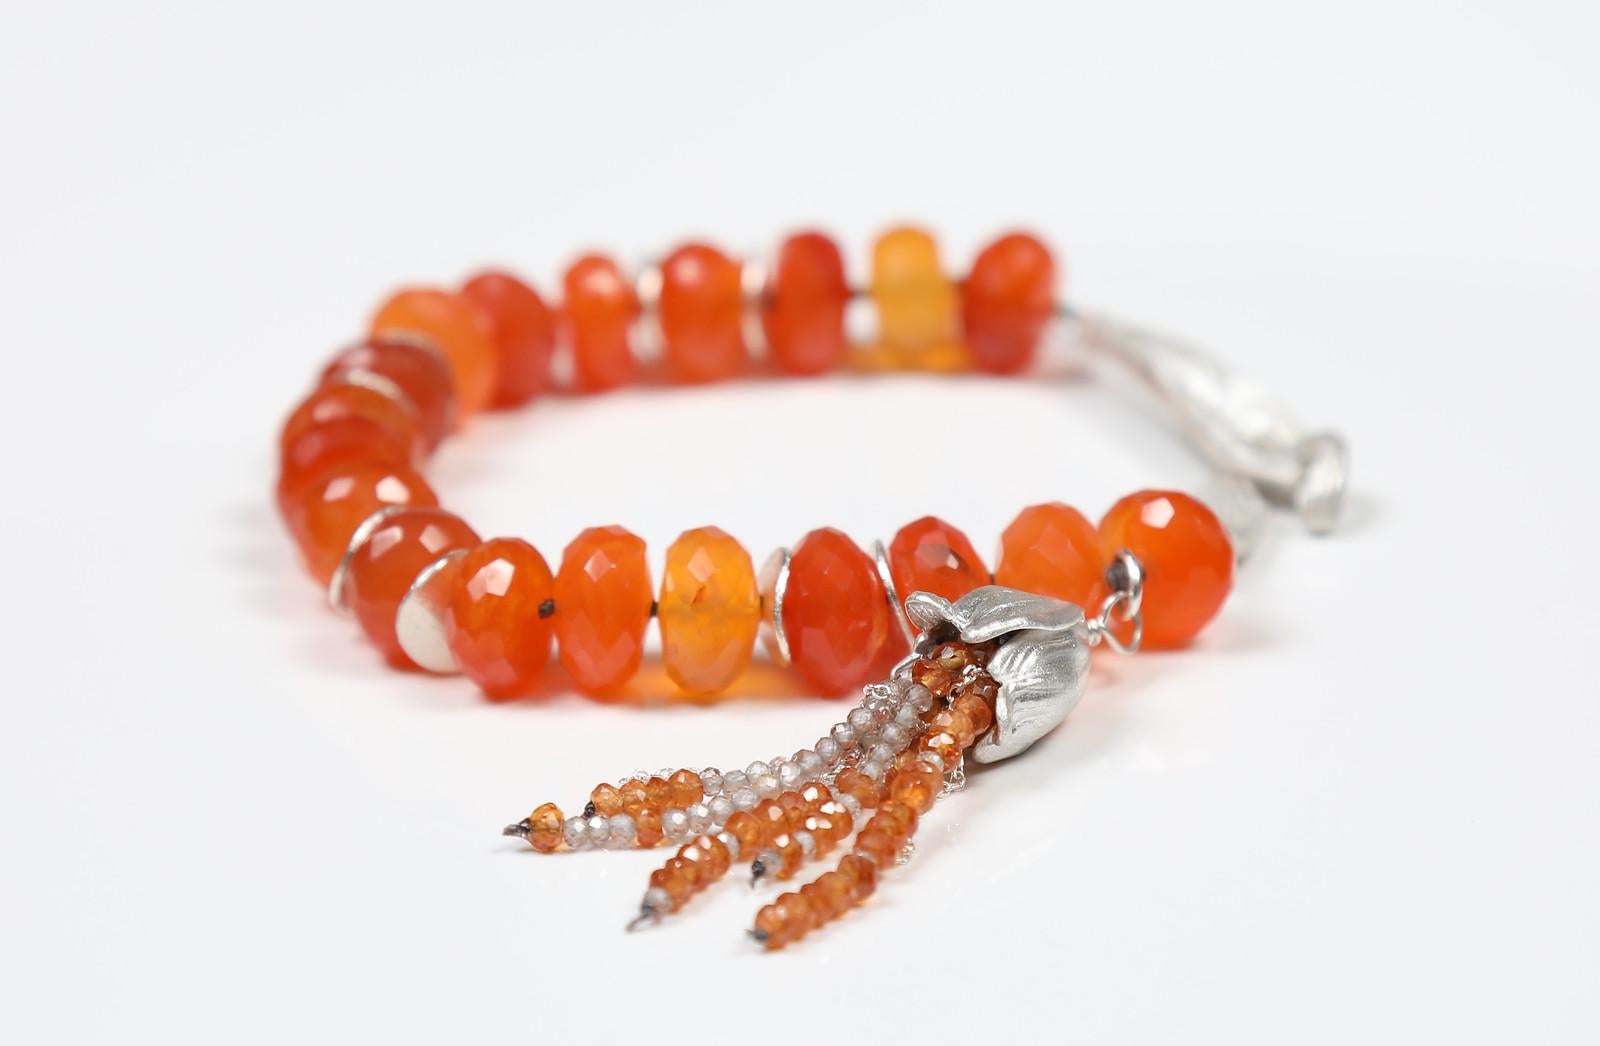 Faceted carnelian (6mm) is bounded by textured sterling spacers and closed with our artisan vanilla bean clasp.  A tassel of carnelian, rutilated quartz, and sterling chain completes the look.  7.5